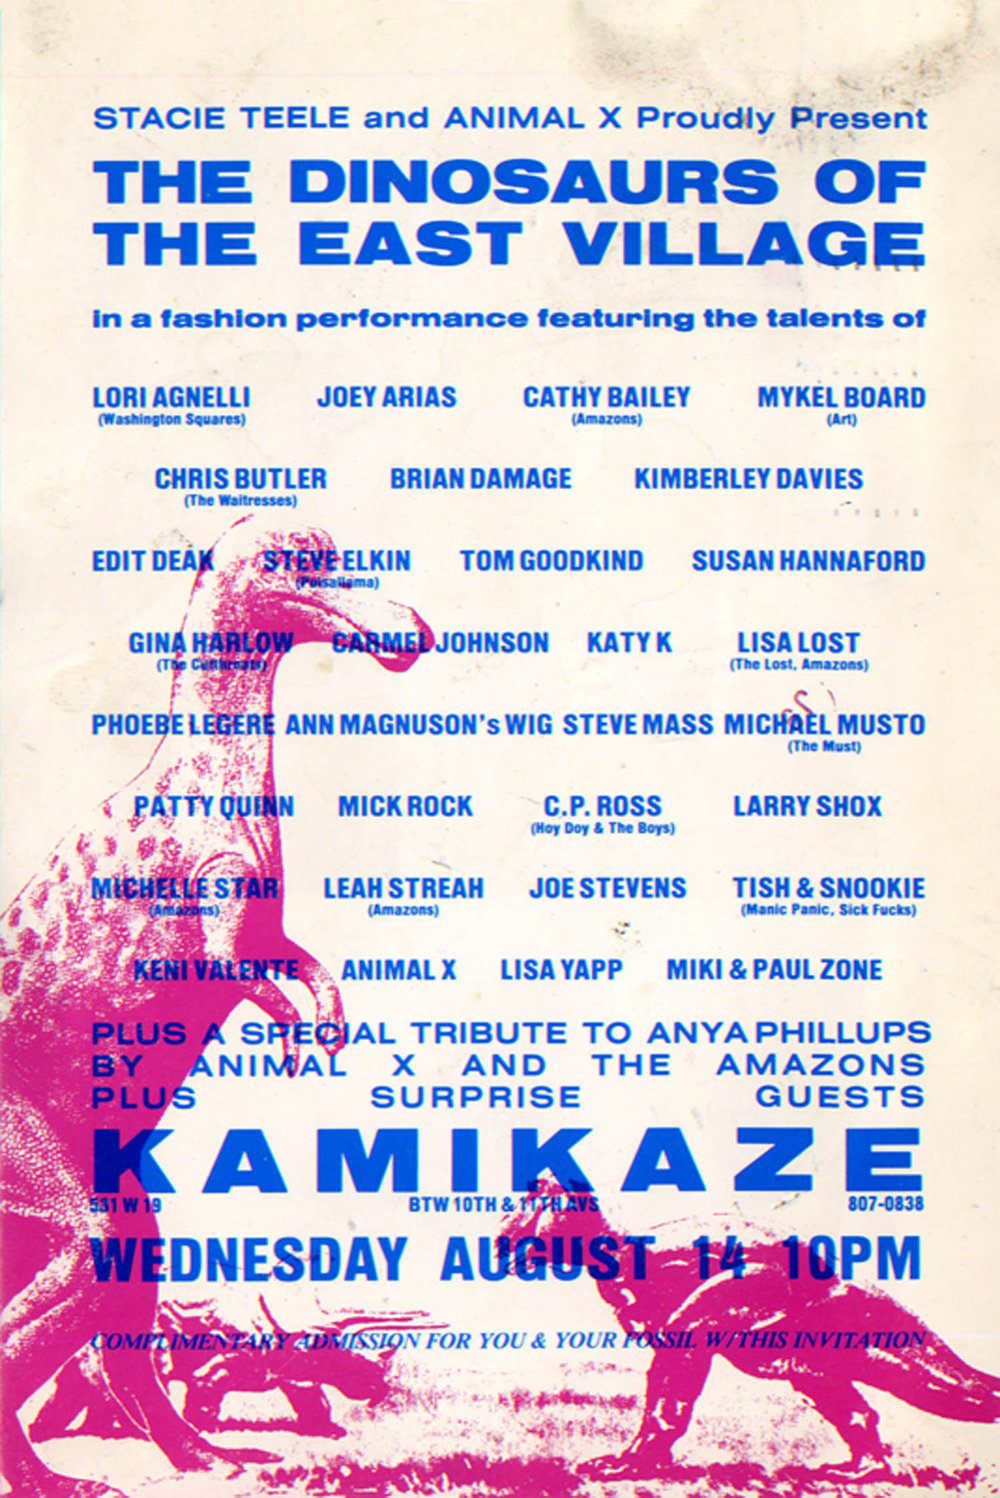 Kamikaze, Dinosaurs of the East Village Art Exhibition And Anya Phillips Tribute, Card, 1985